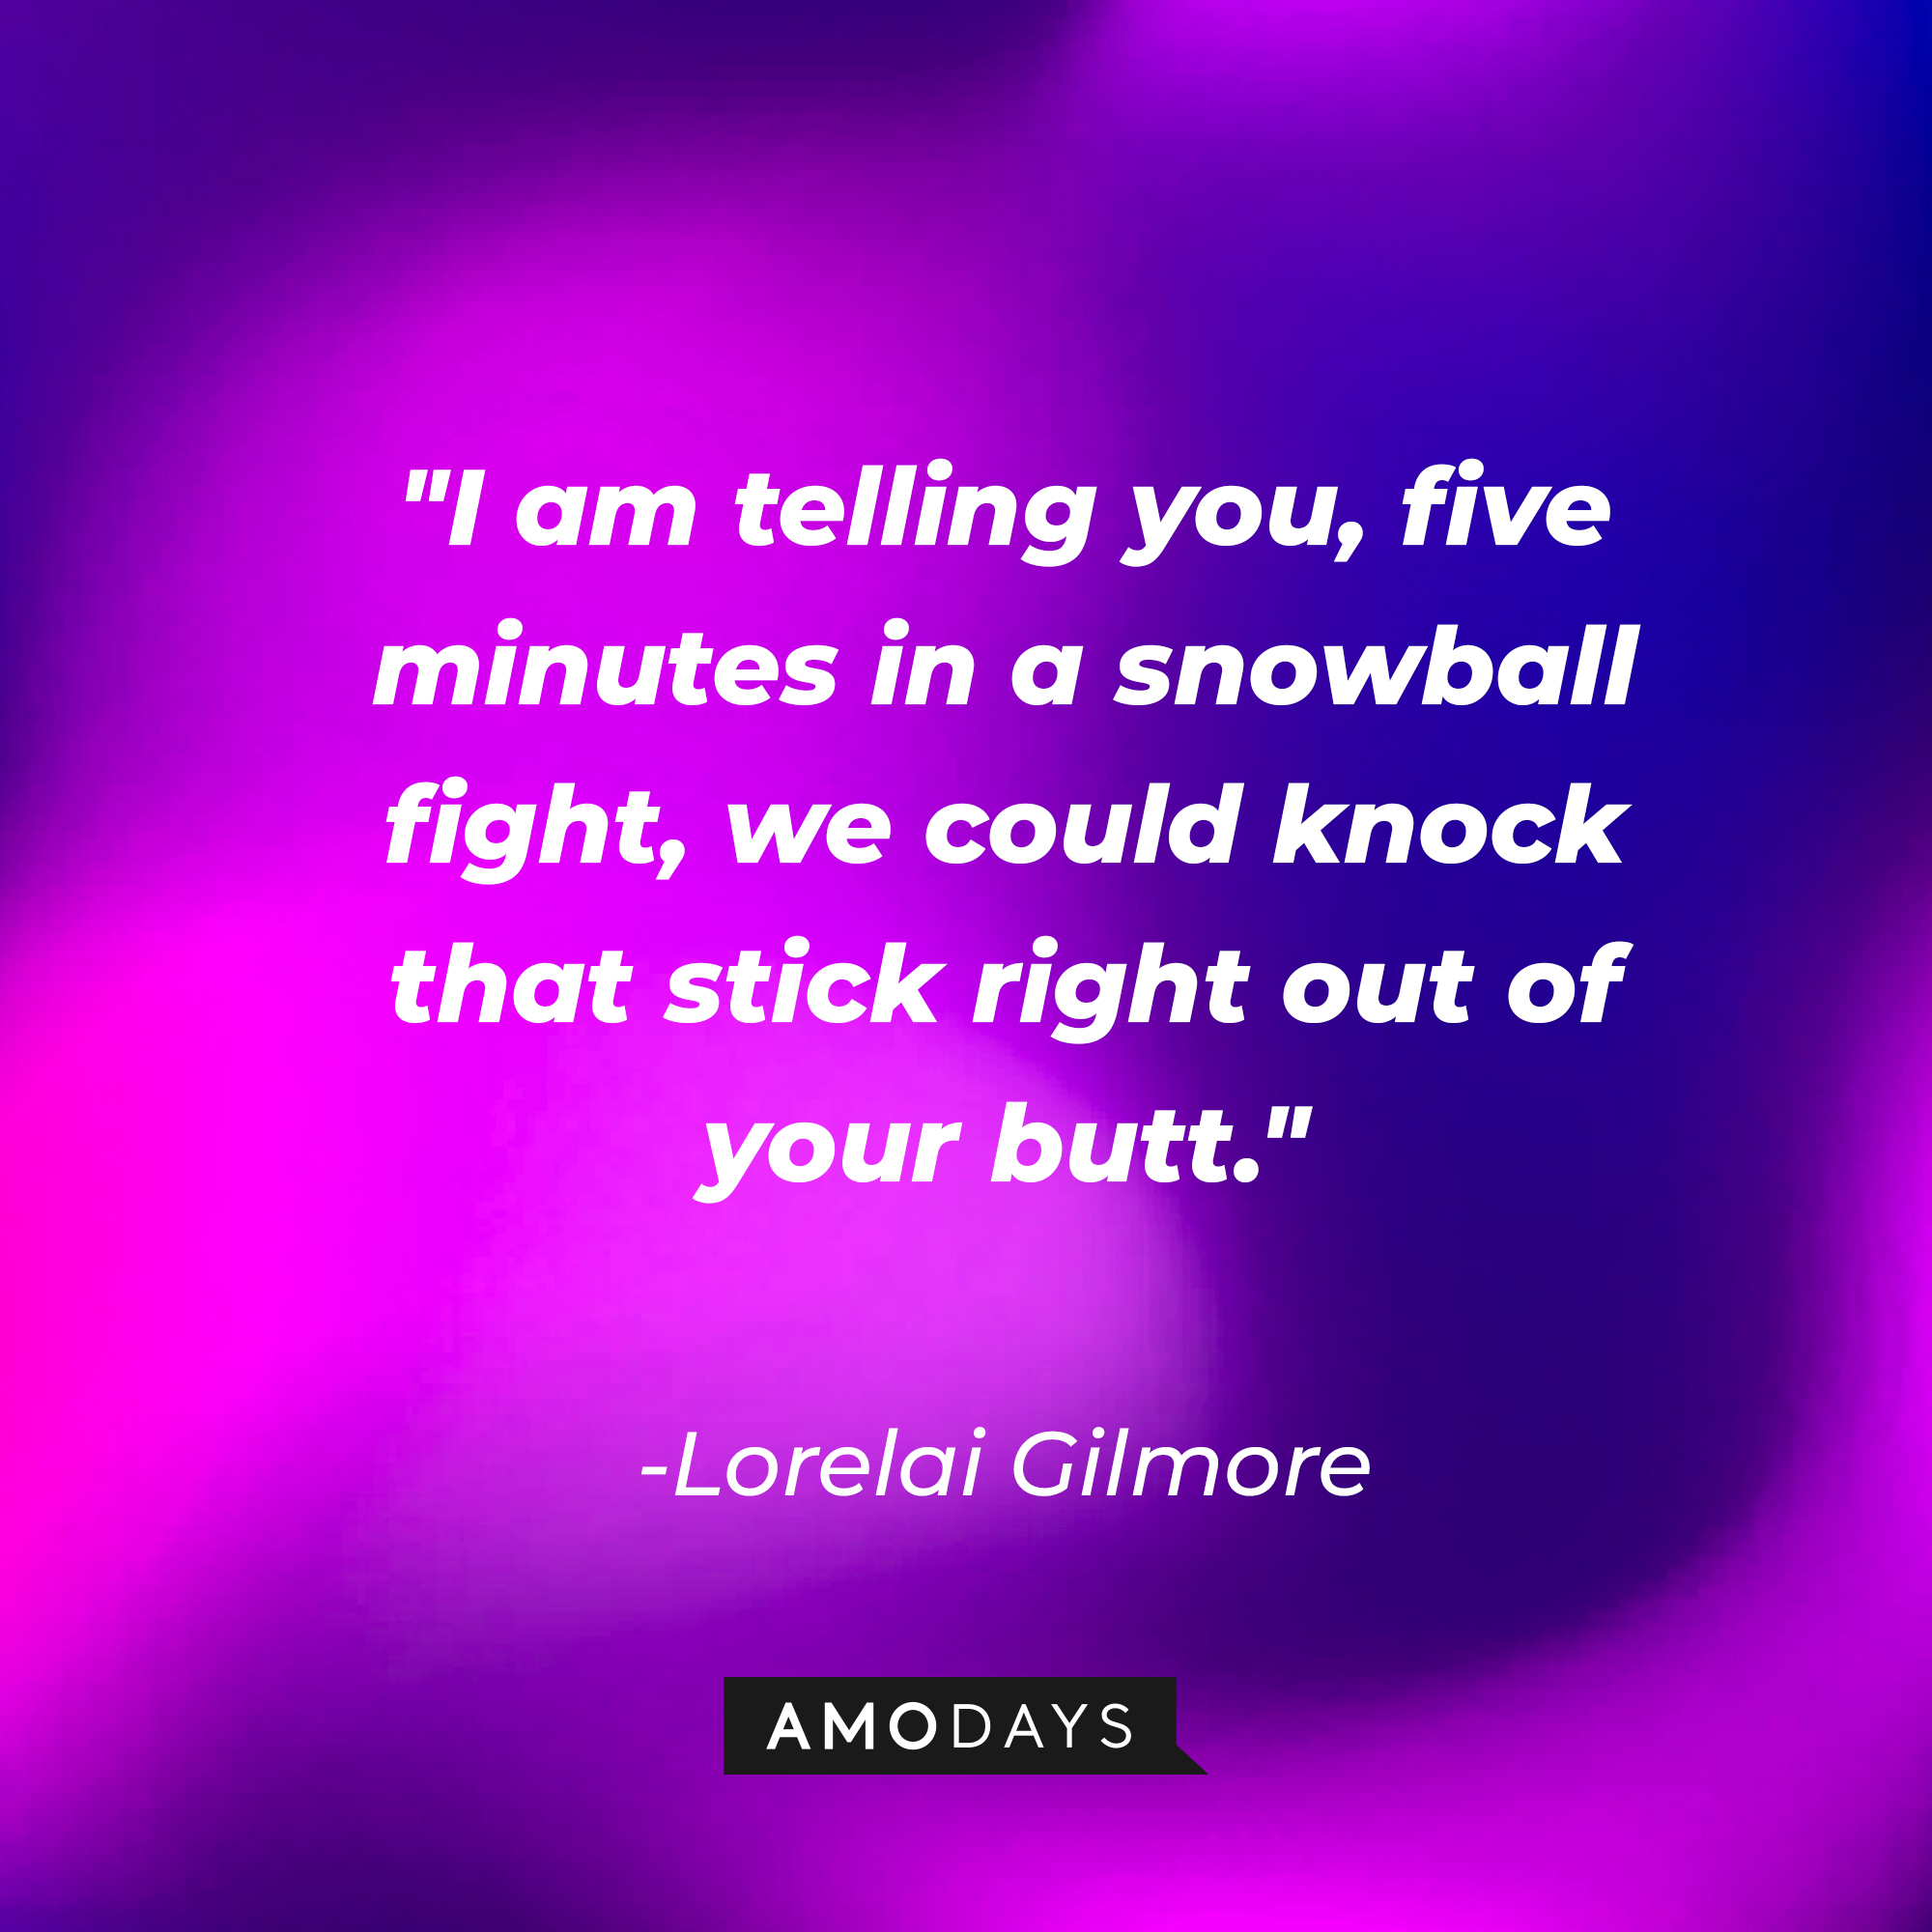 Lorelai Gilmore's quote: "I am telling you, five minutes in a snowball fight, we could knock that stick right out of your butt." | Source: AmoDays